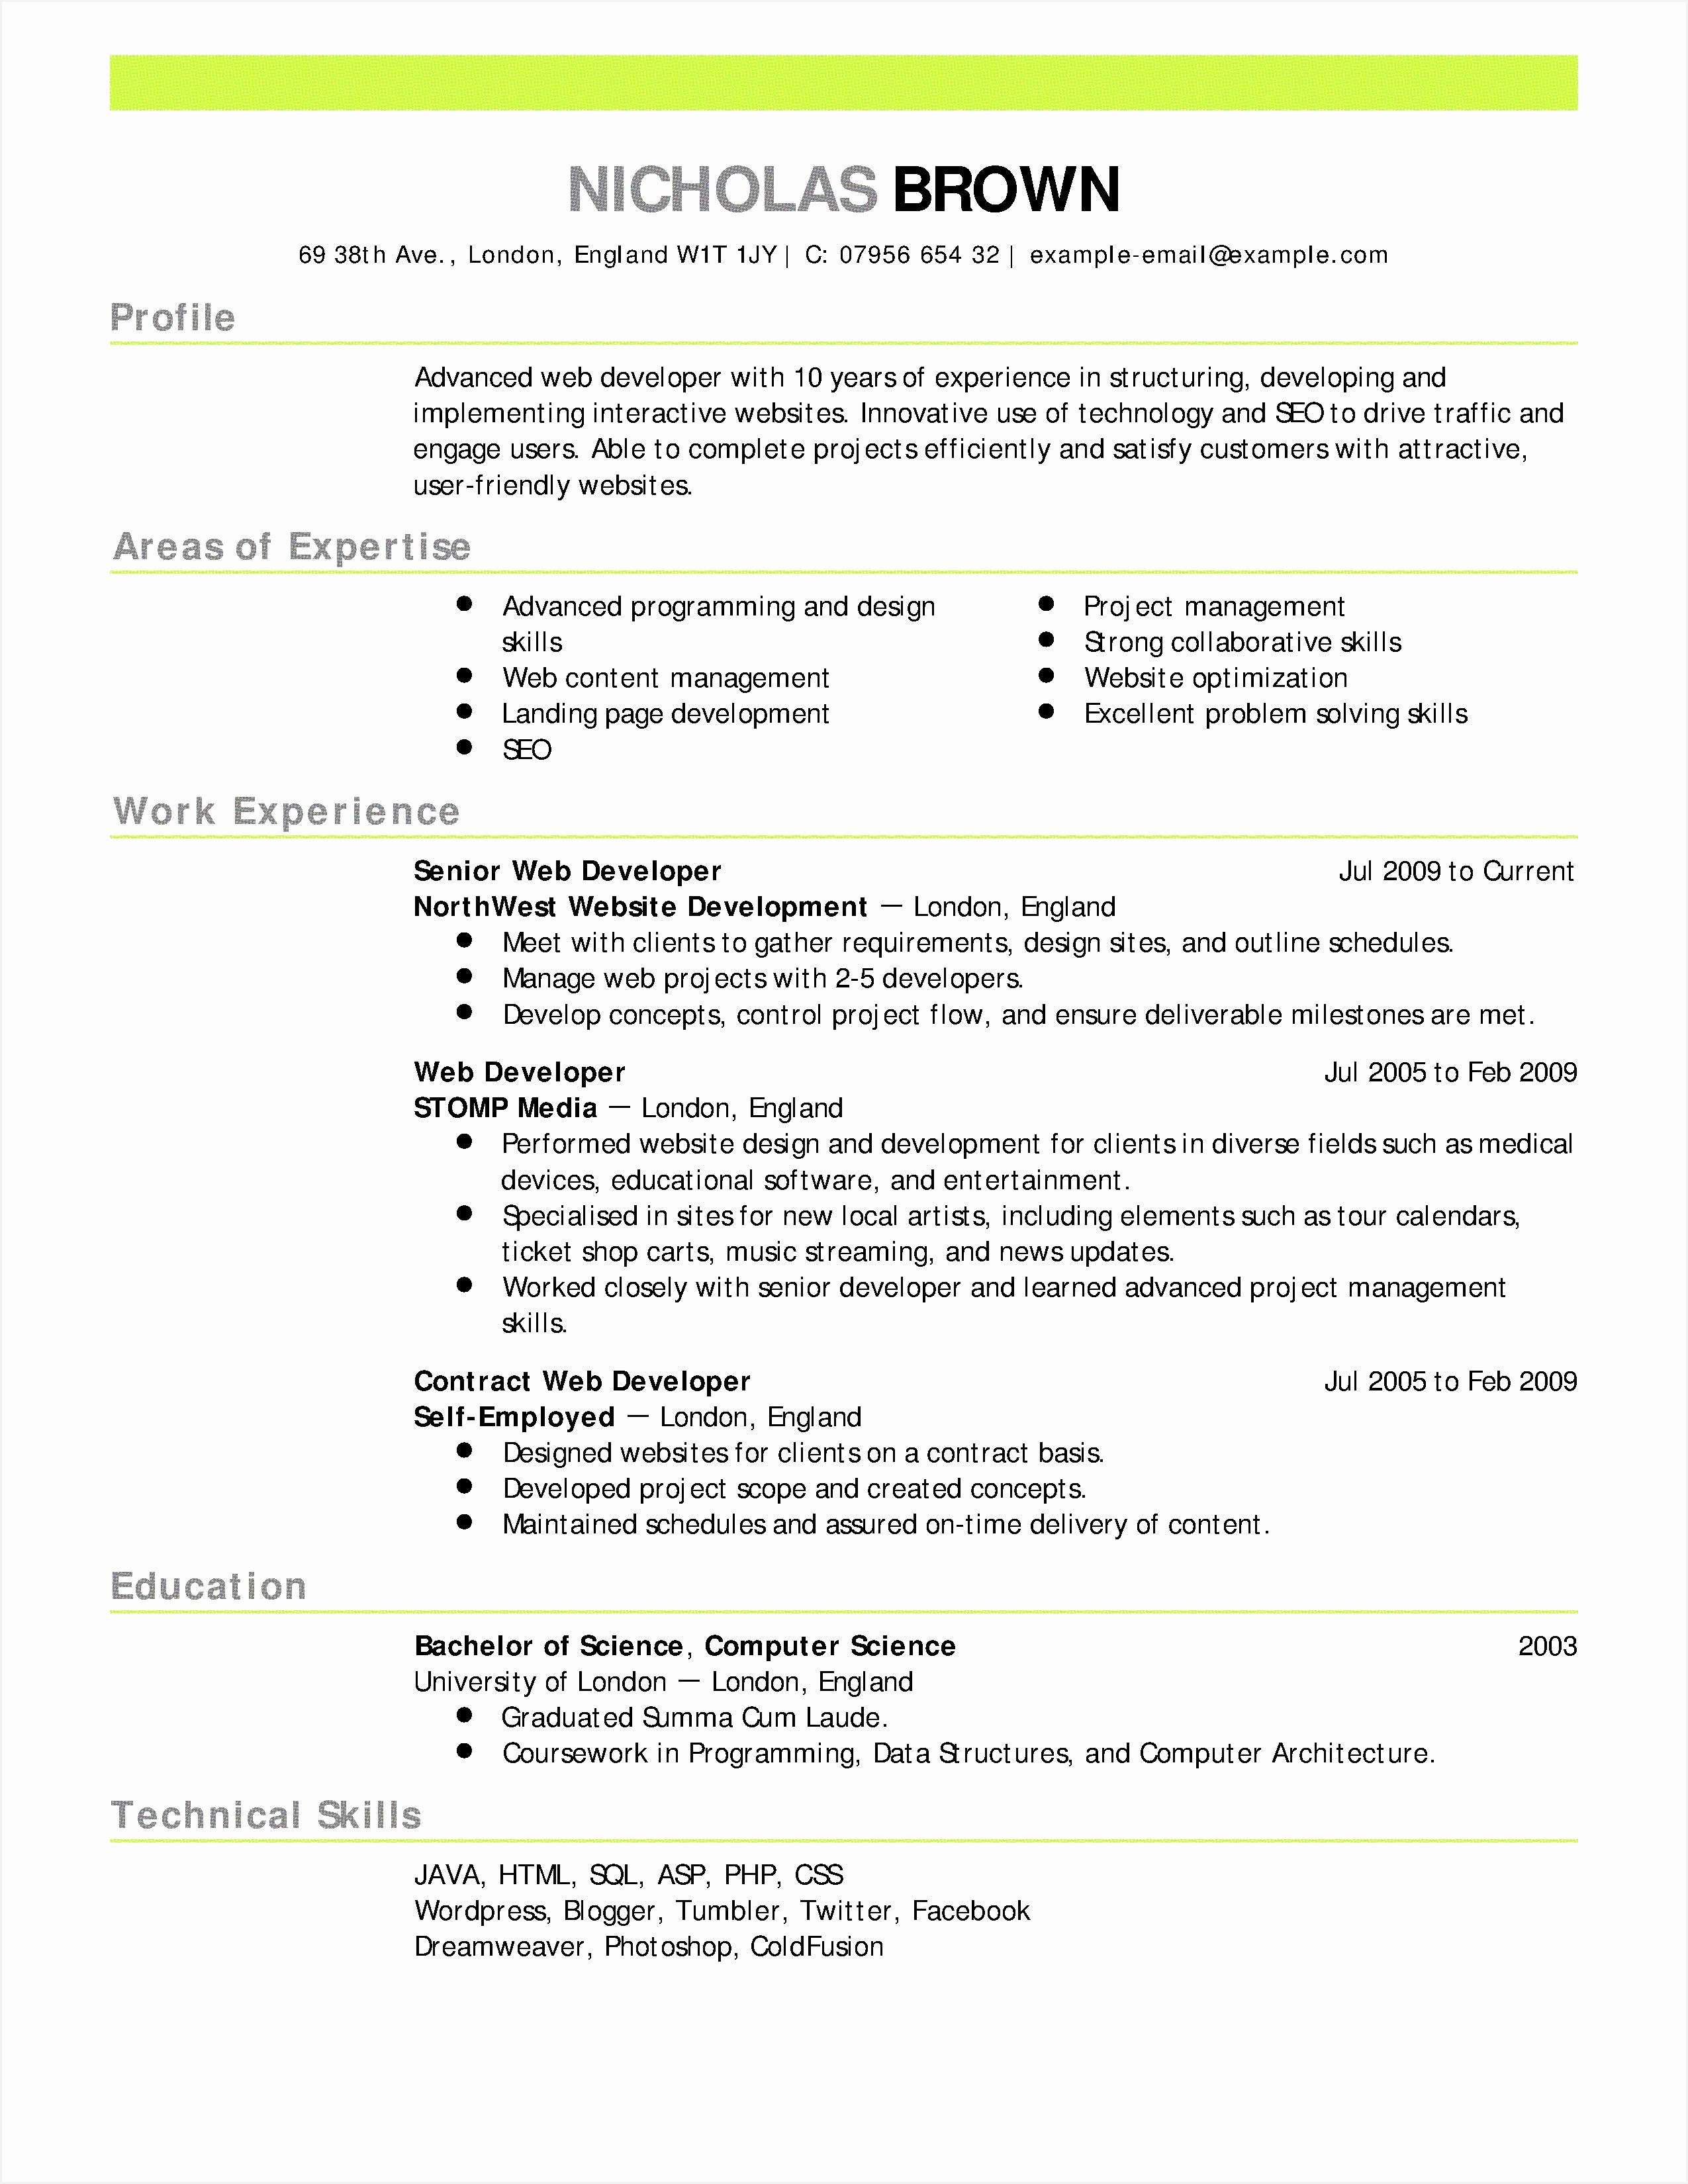 Date Birth format In Resume Unique Professional Job Resume Template Od Specialist Cover Letter Lead33002550